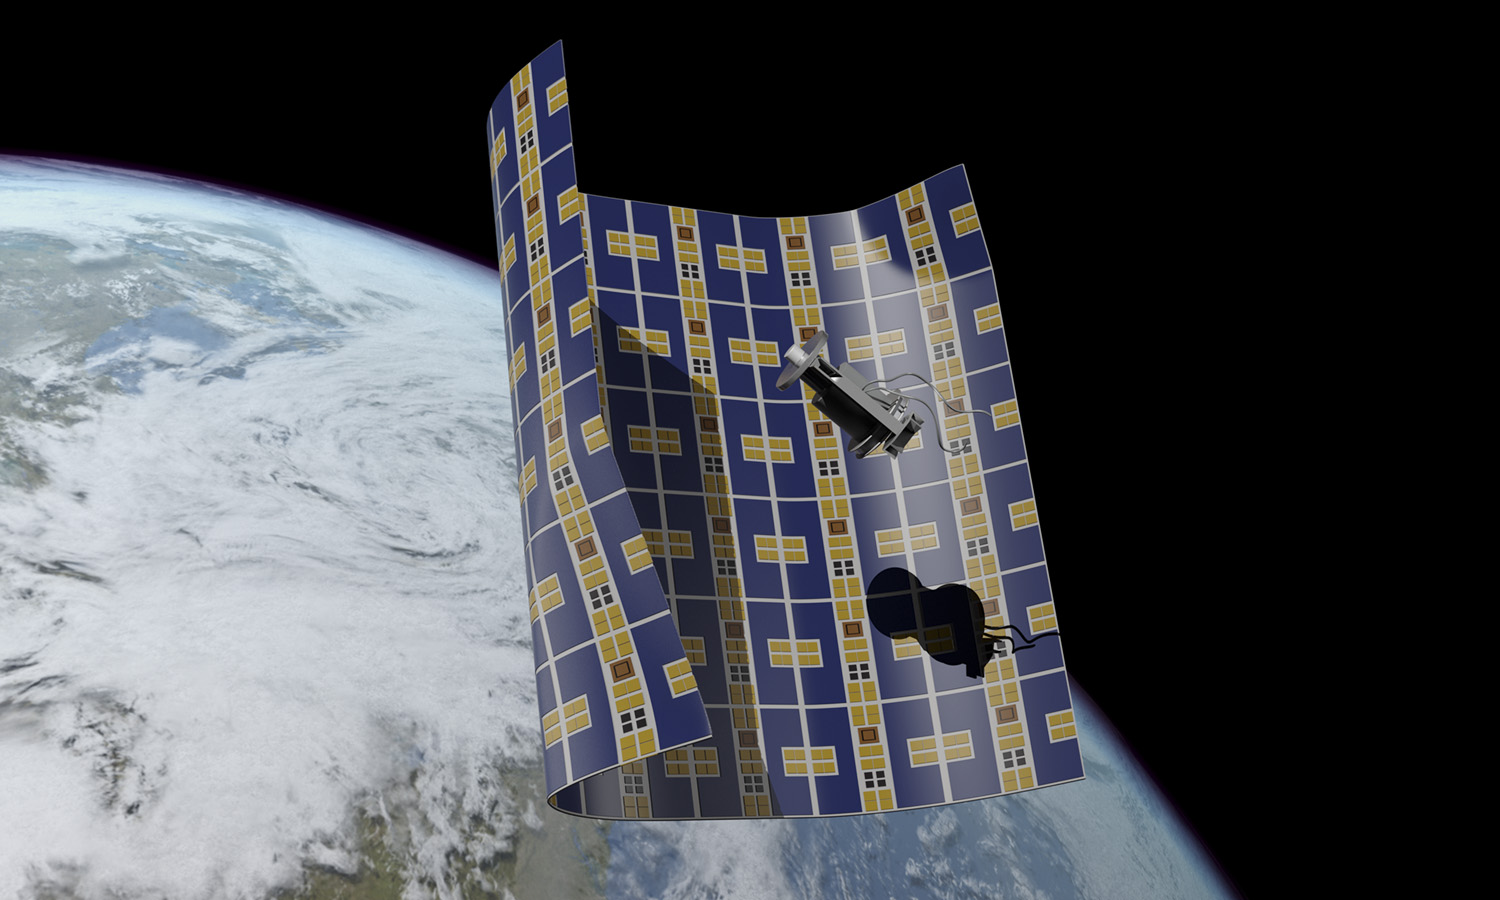 Graphic depiction of the Brane Craft concept in space above the Earth.